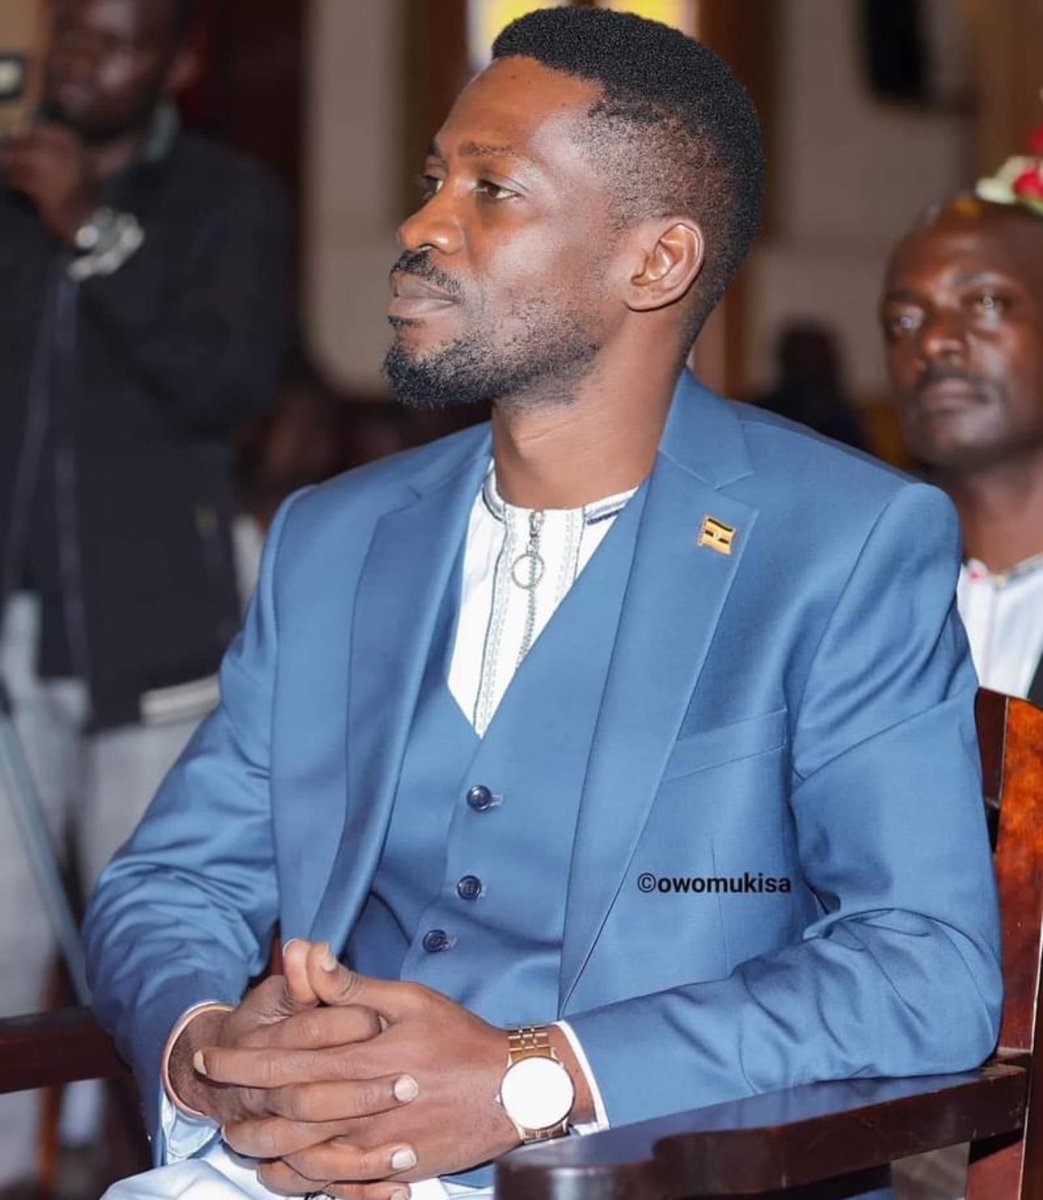 Good Morning Uganda. A blessed @HEBobiwine (Successful) week to you all.